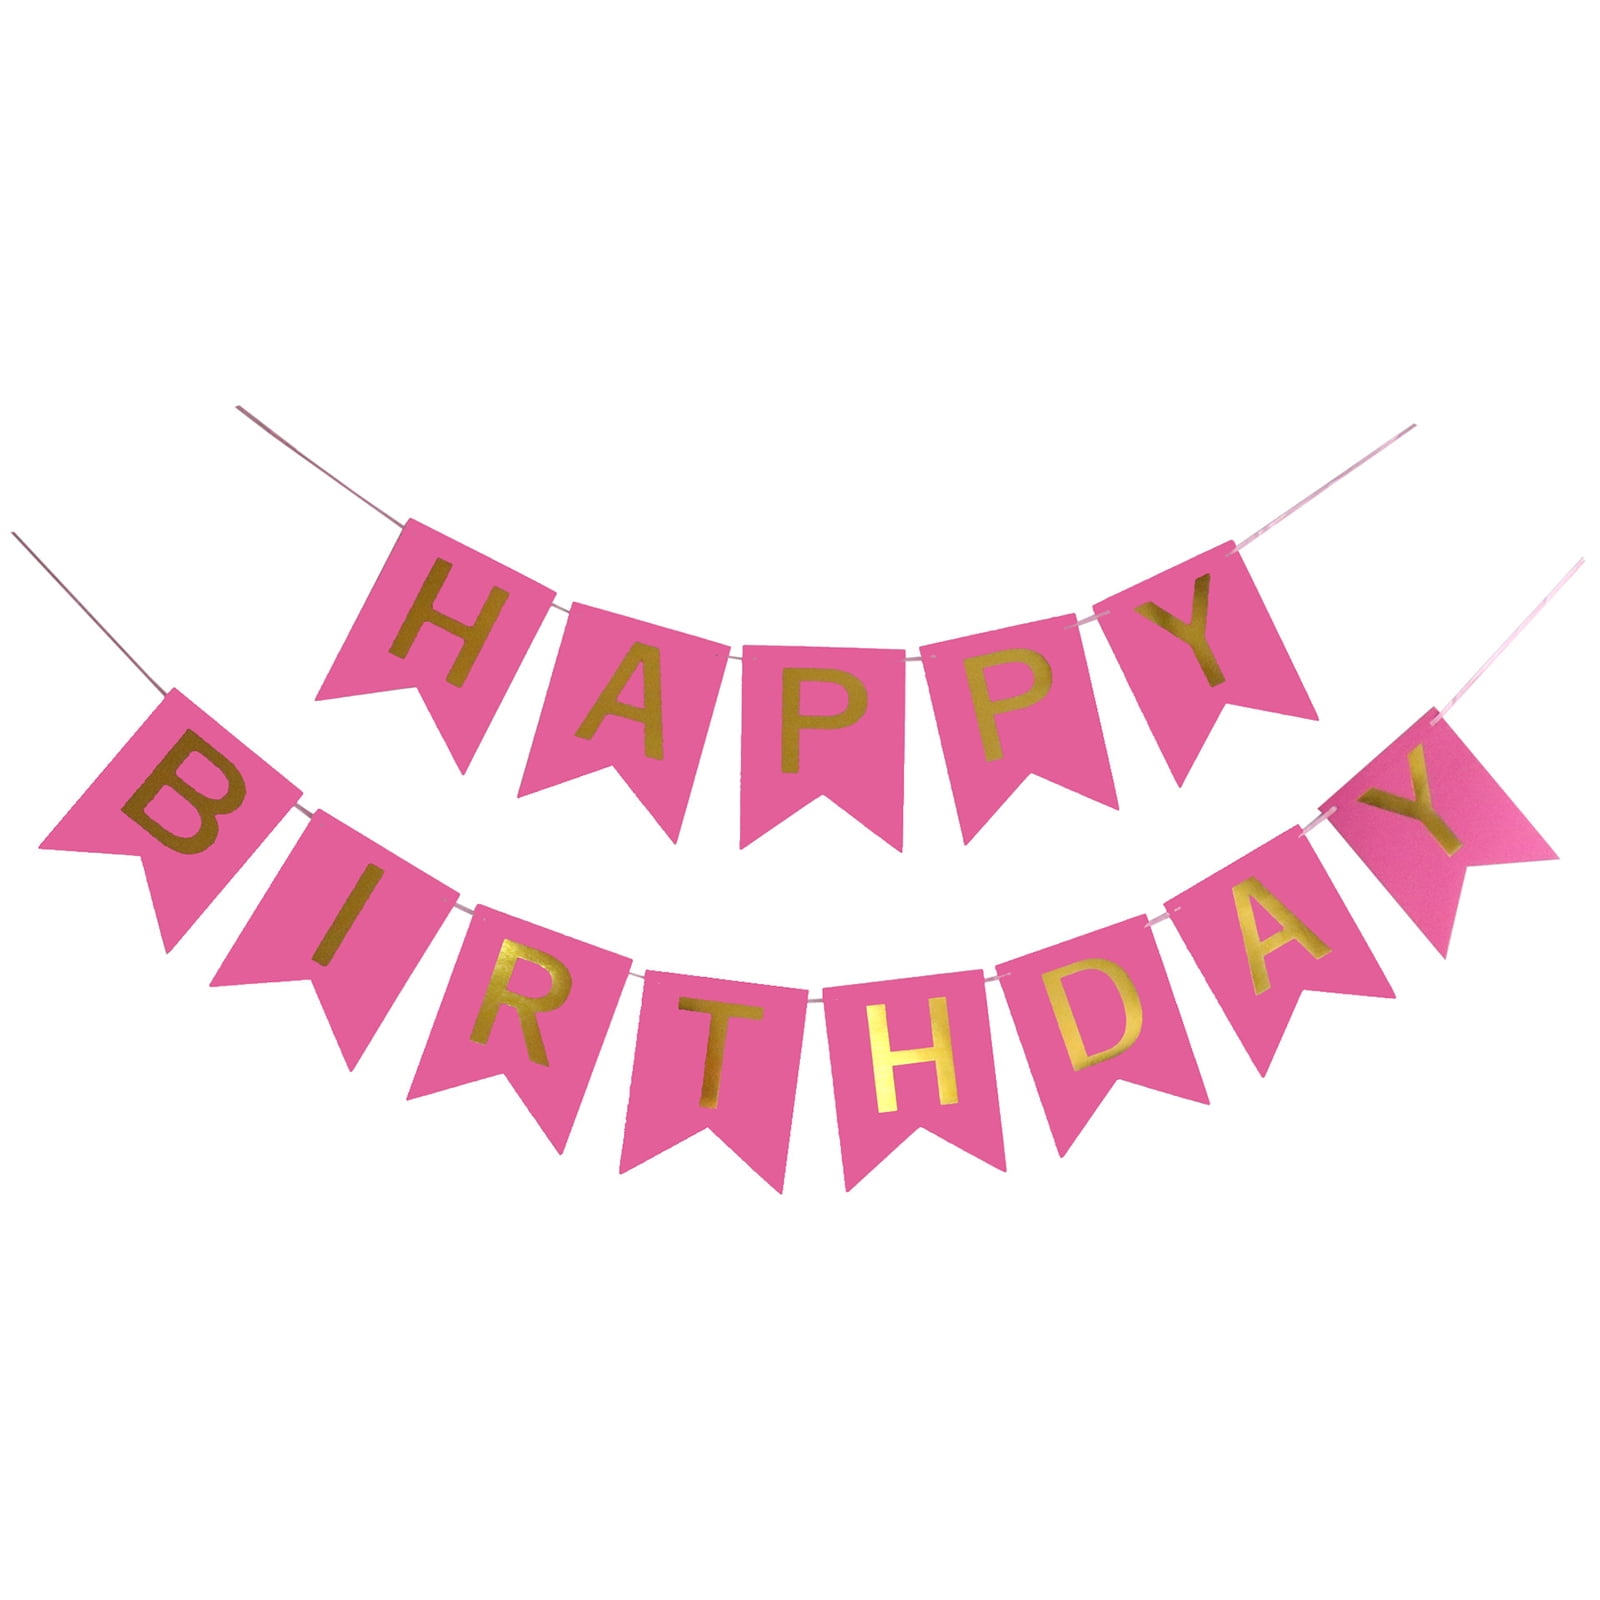 Gold HAPPY BIRTHDAY BUNTING BANNER LETTER HANGING PARTY DECORATION Light Pink